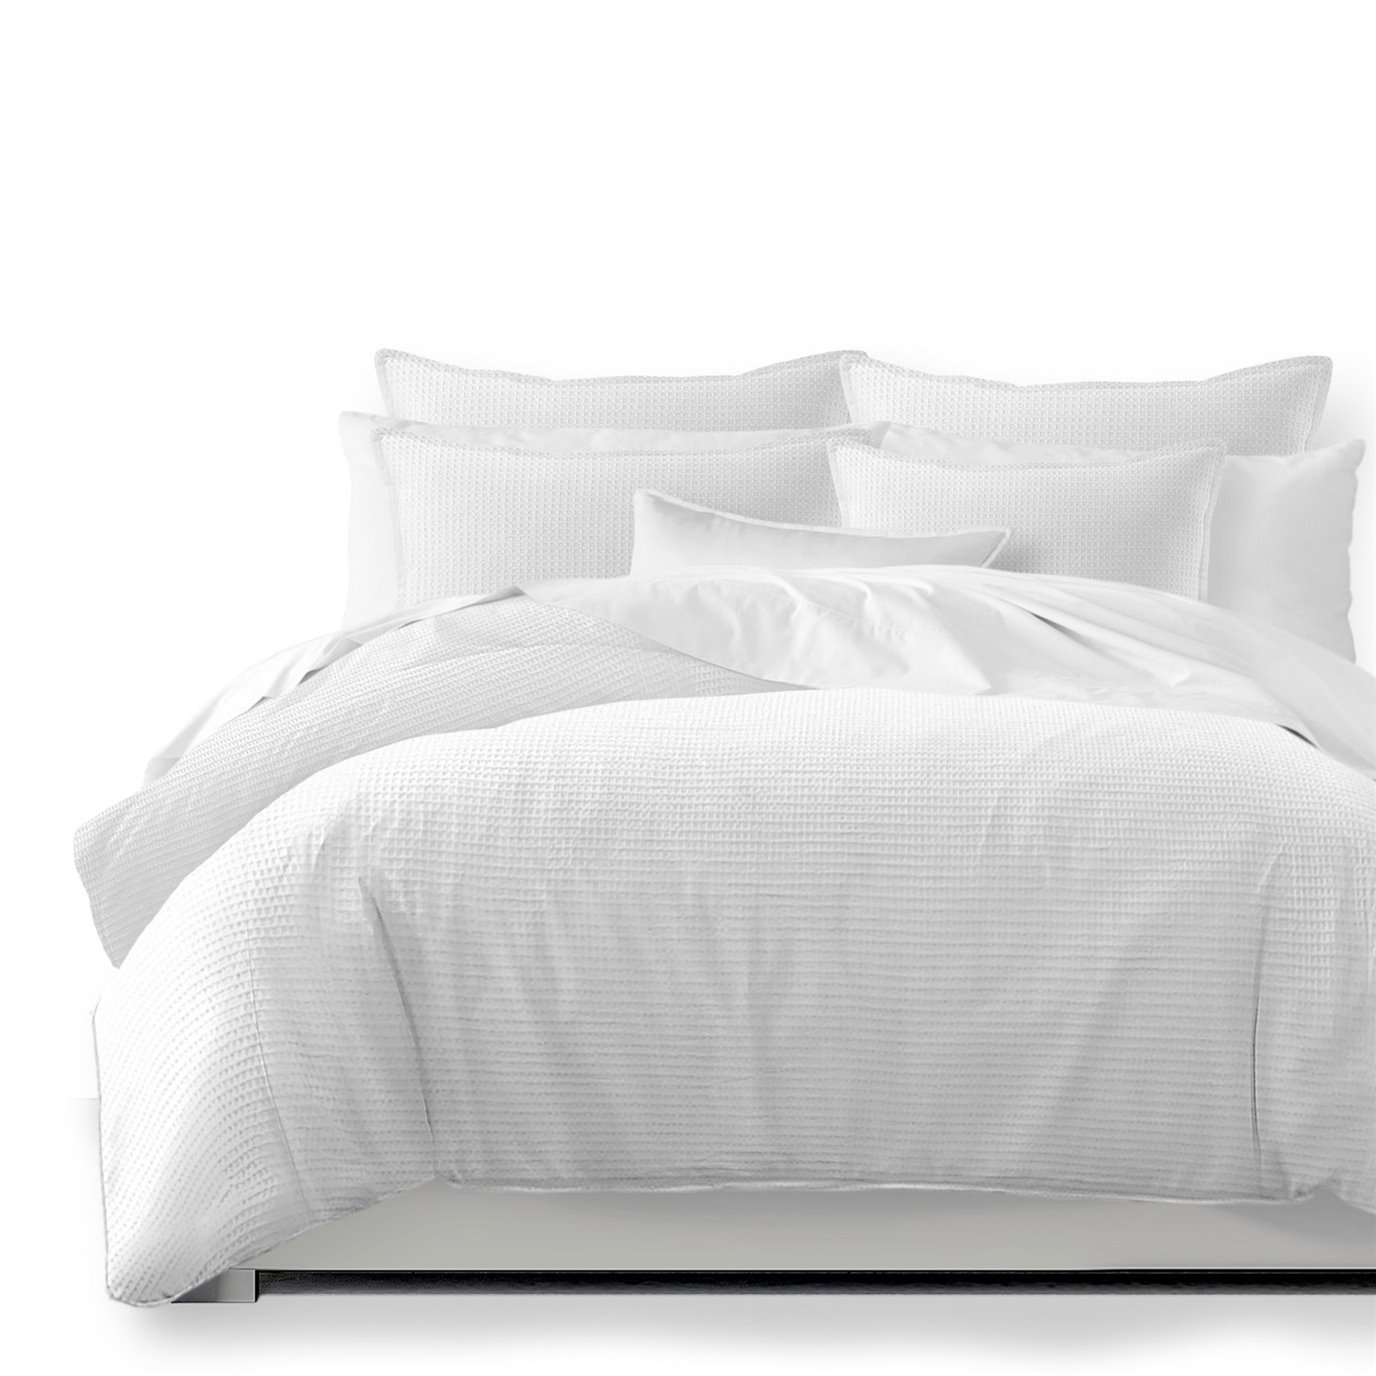 Classic Waffle White Comforter and Pillow Sham(s) Set - Size Full